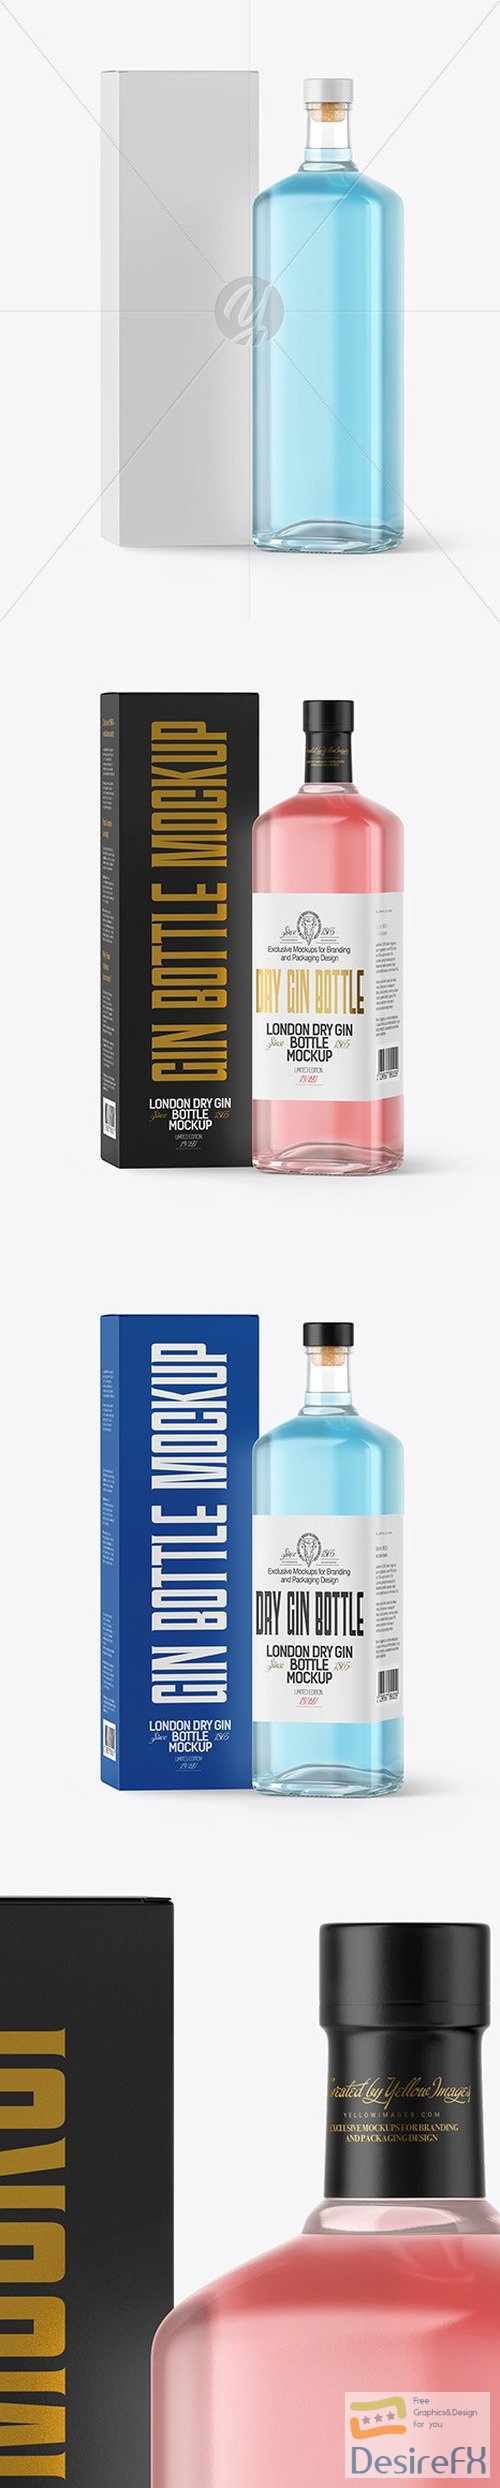 Gin Bottle with Box Mockup 53586